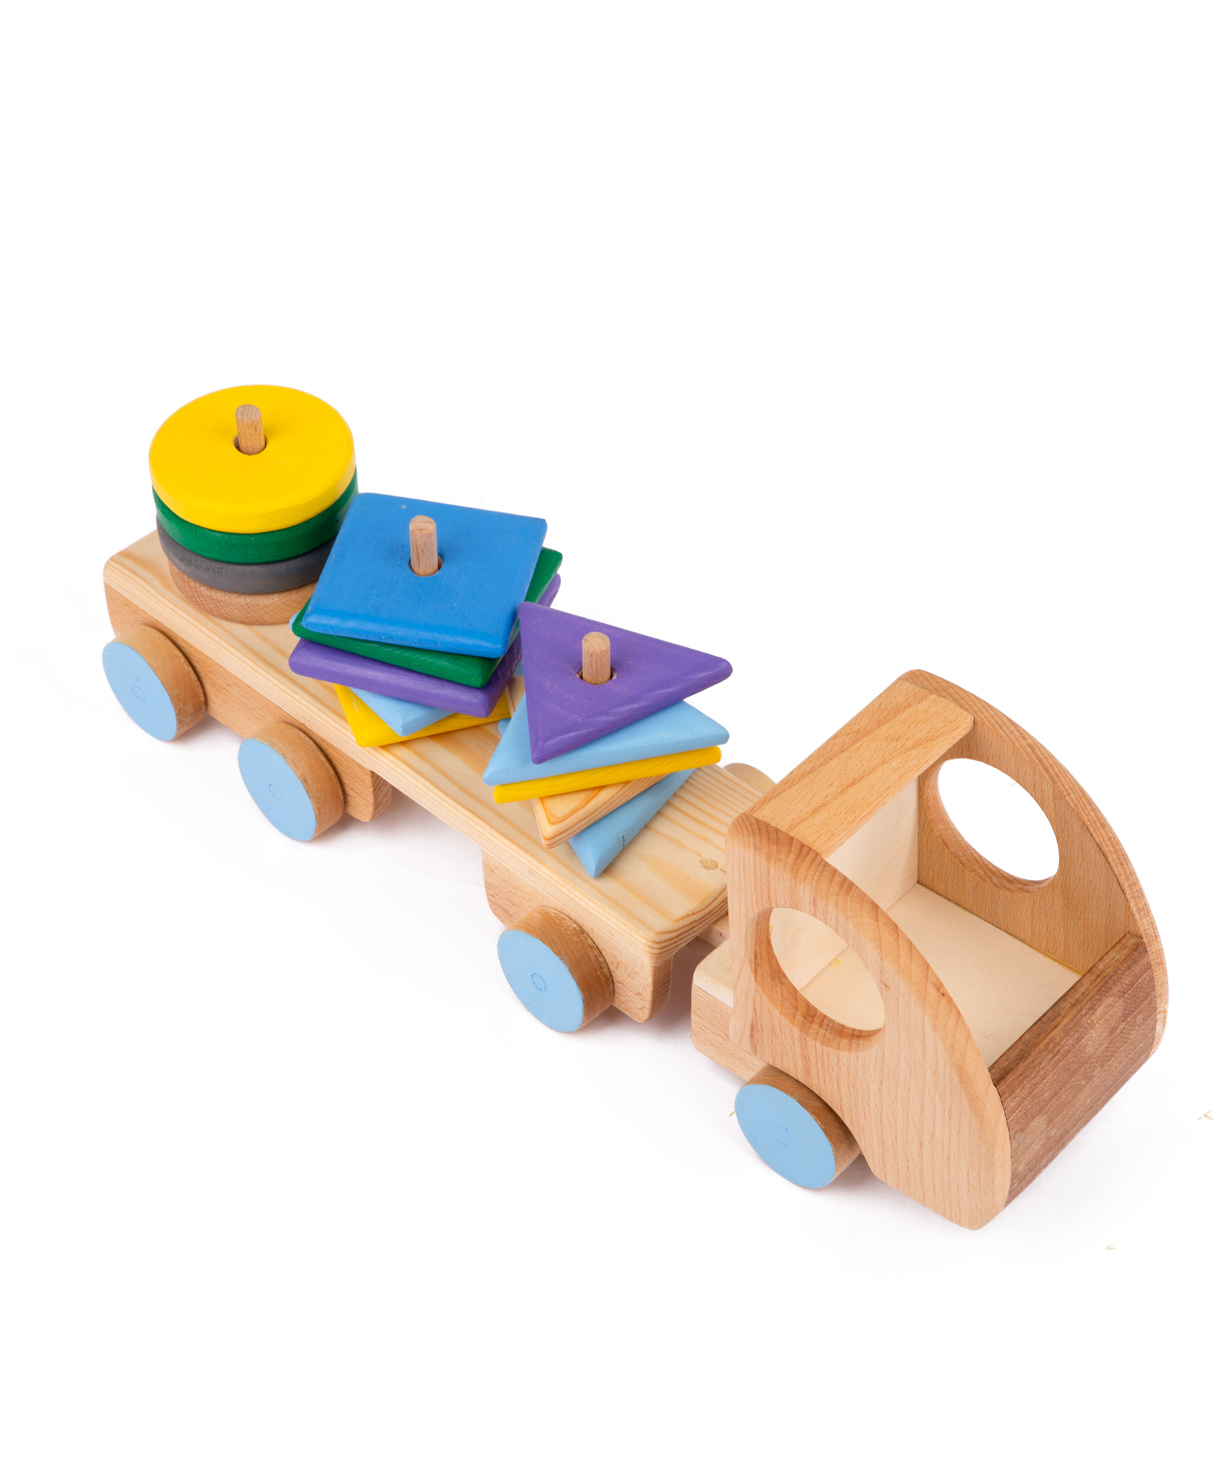 Toy `I'm wooden toys` car, wooden №8